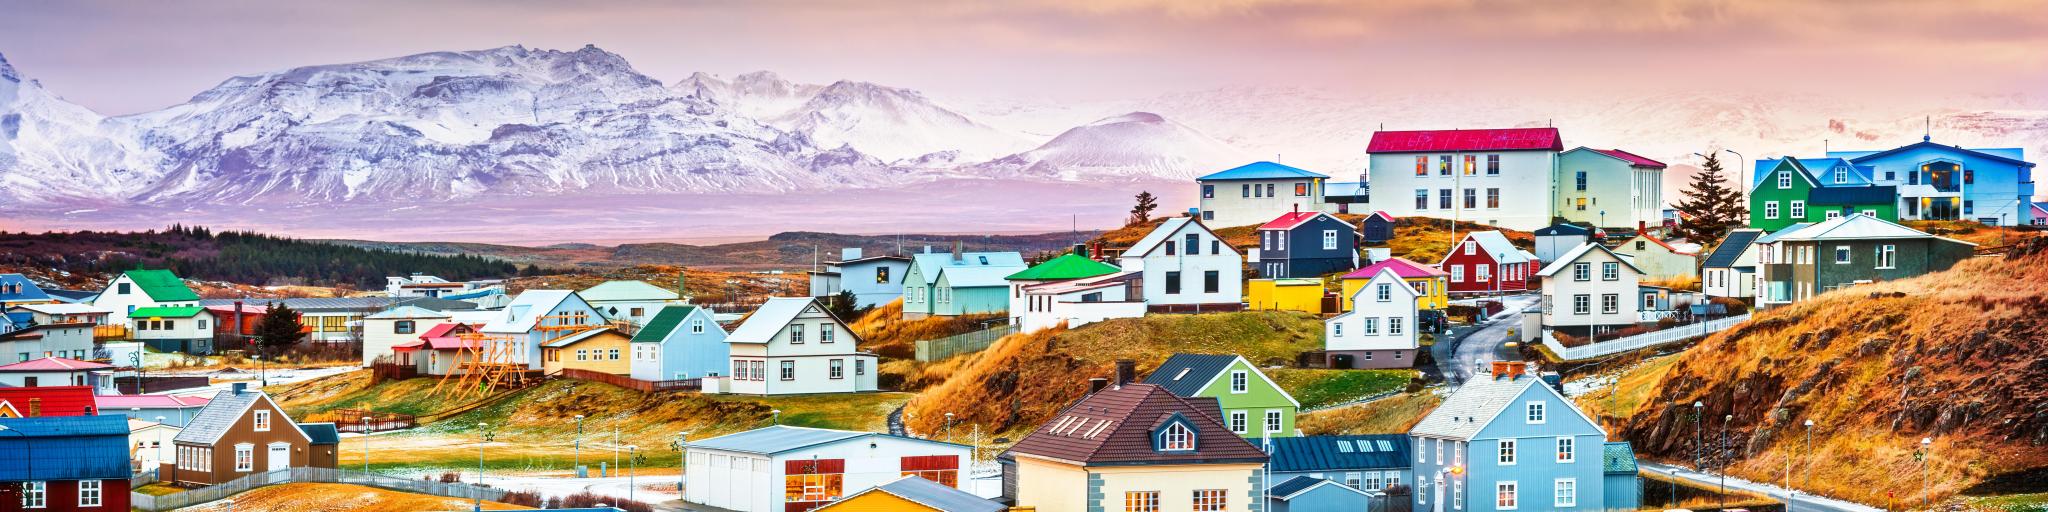  Colorful Icelandic houses with the backdrop of a majestic, snow-covered mountain, pink misty hue surrounding it